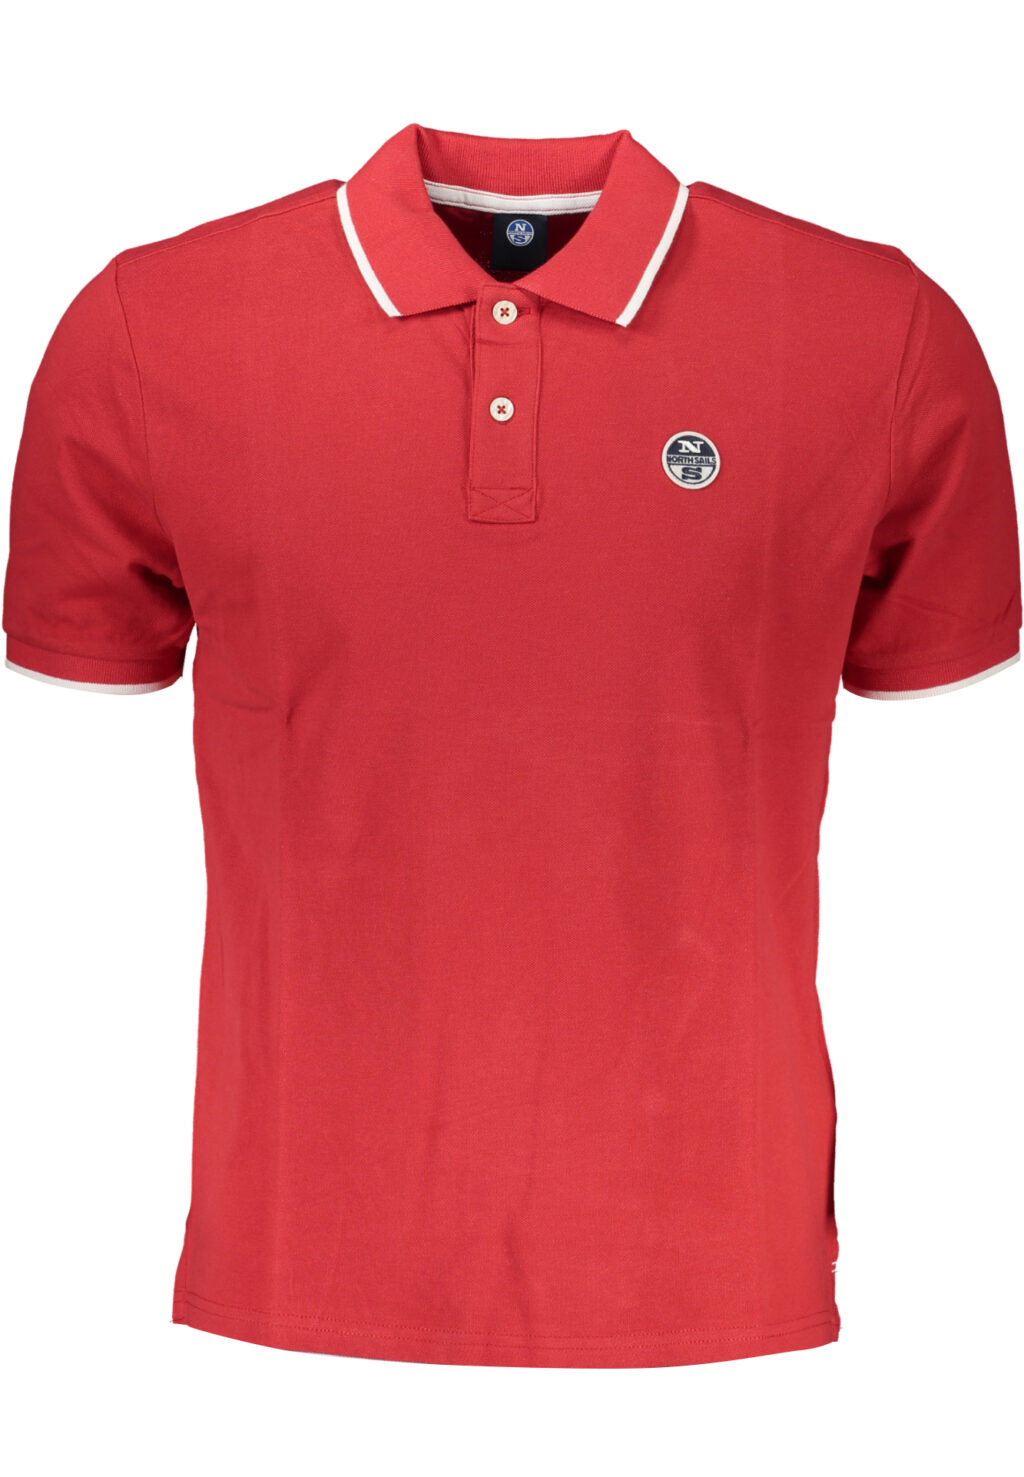 NORTH SAILS MEN'S RED SHORT SLEEVED POLO SHIRT 902827000_RO0230